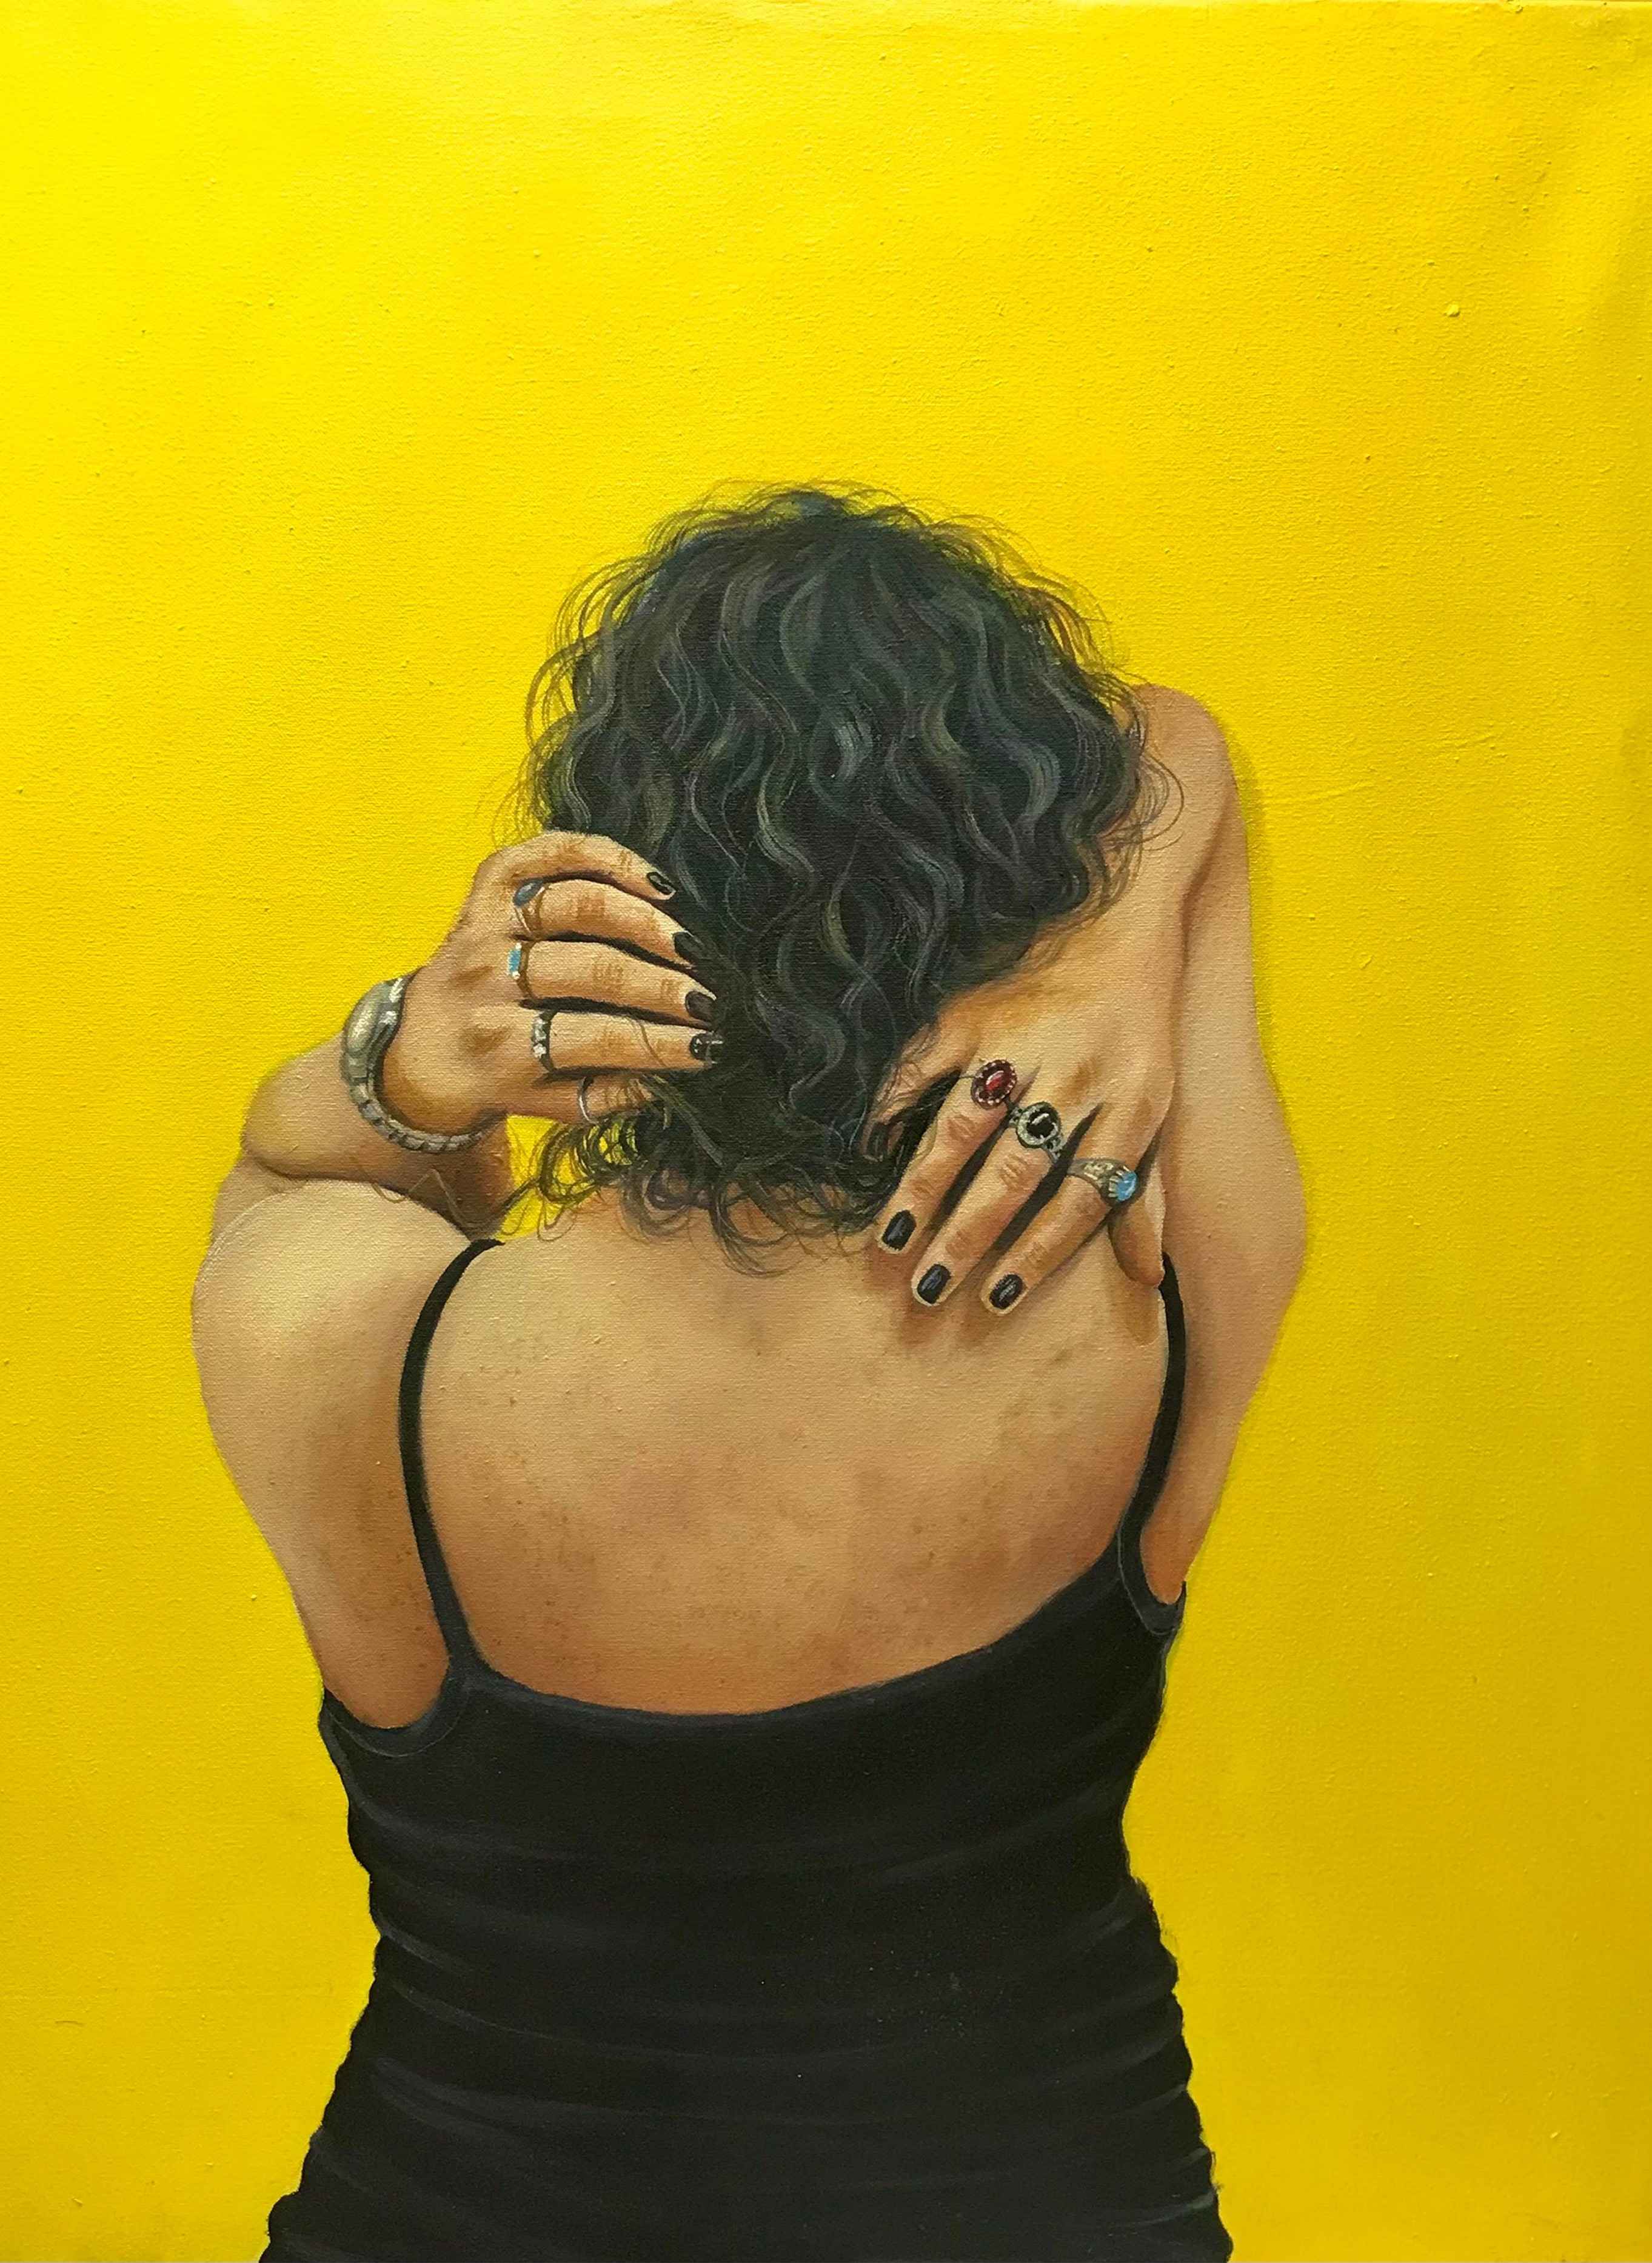 Artist:  Erum Akhtar <br> Title:  INTROSPECTION II <br> Medium: Oil on canvas<br> Size: 30x24 inches